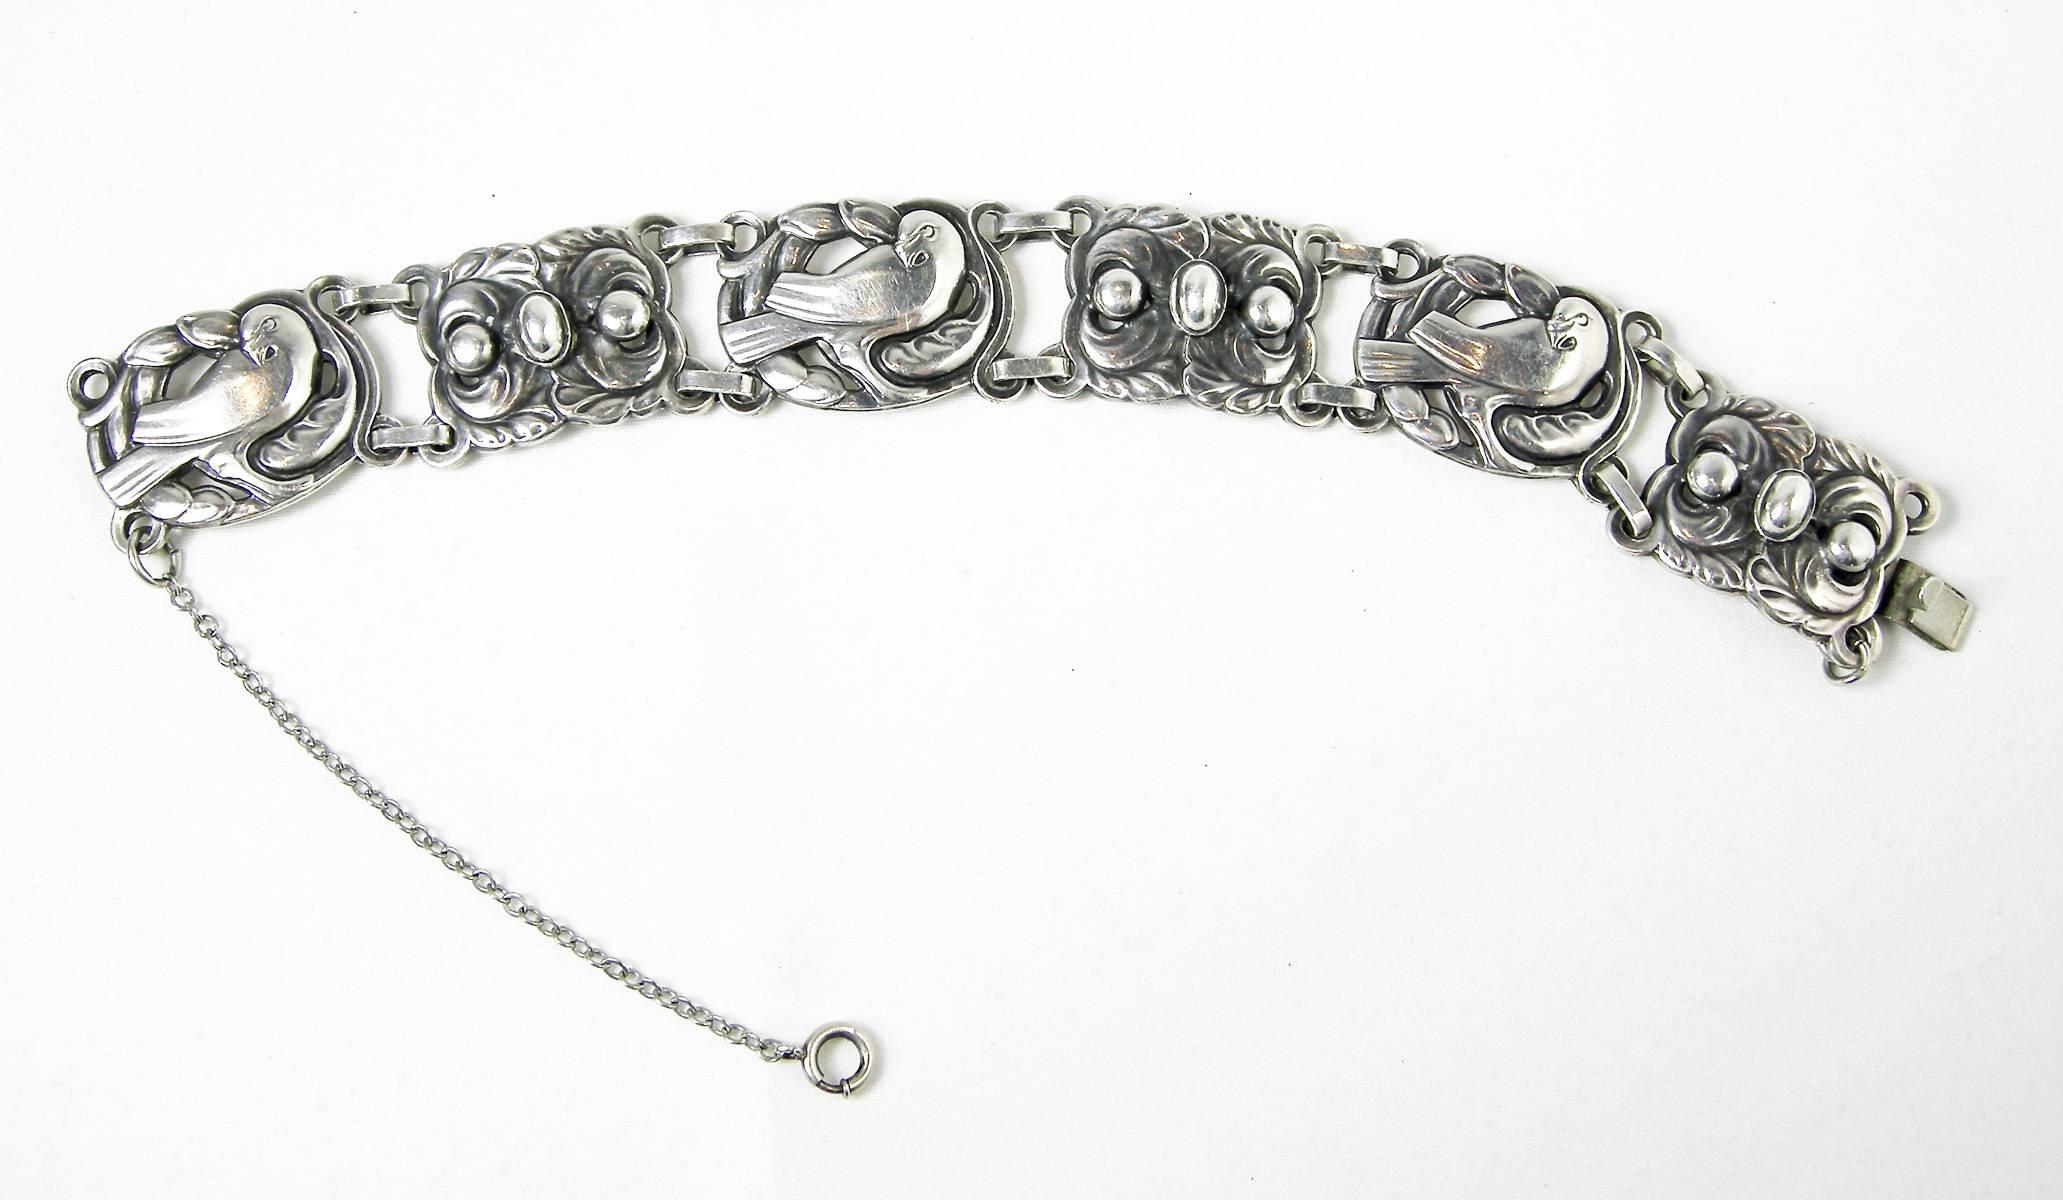 This Norseland bird bracelet in sterling silver looks as if it was Jensen Danish inspired.  It is signed with the Norseland /sterling and Reg US Pat Off.  It also must have been given to “Jimmy” with the date “1941”.  It has a fold over clasp and a